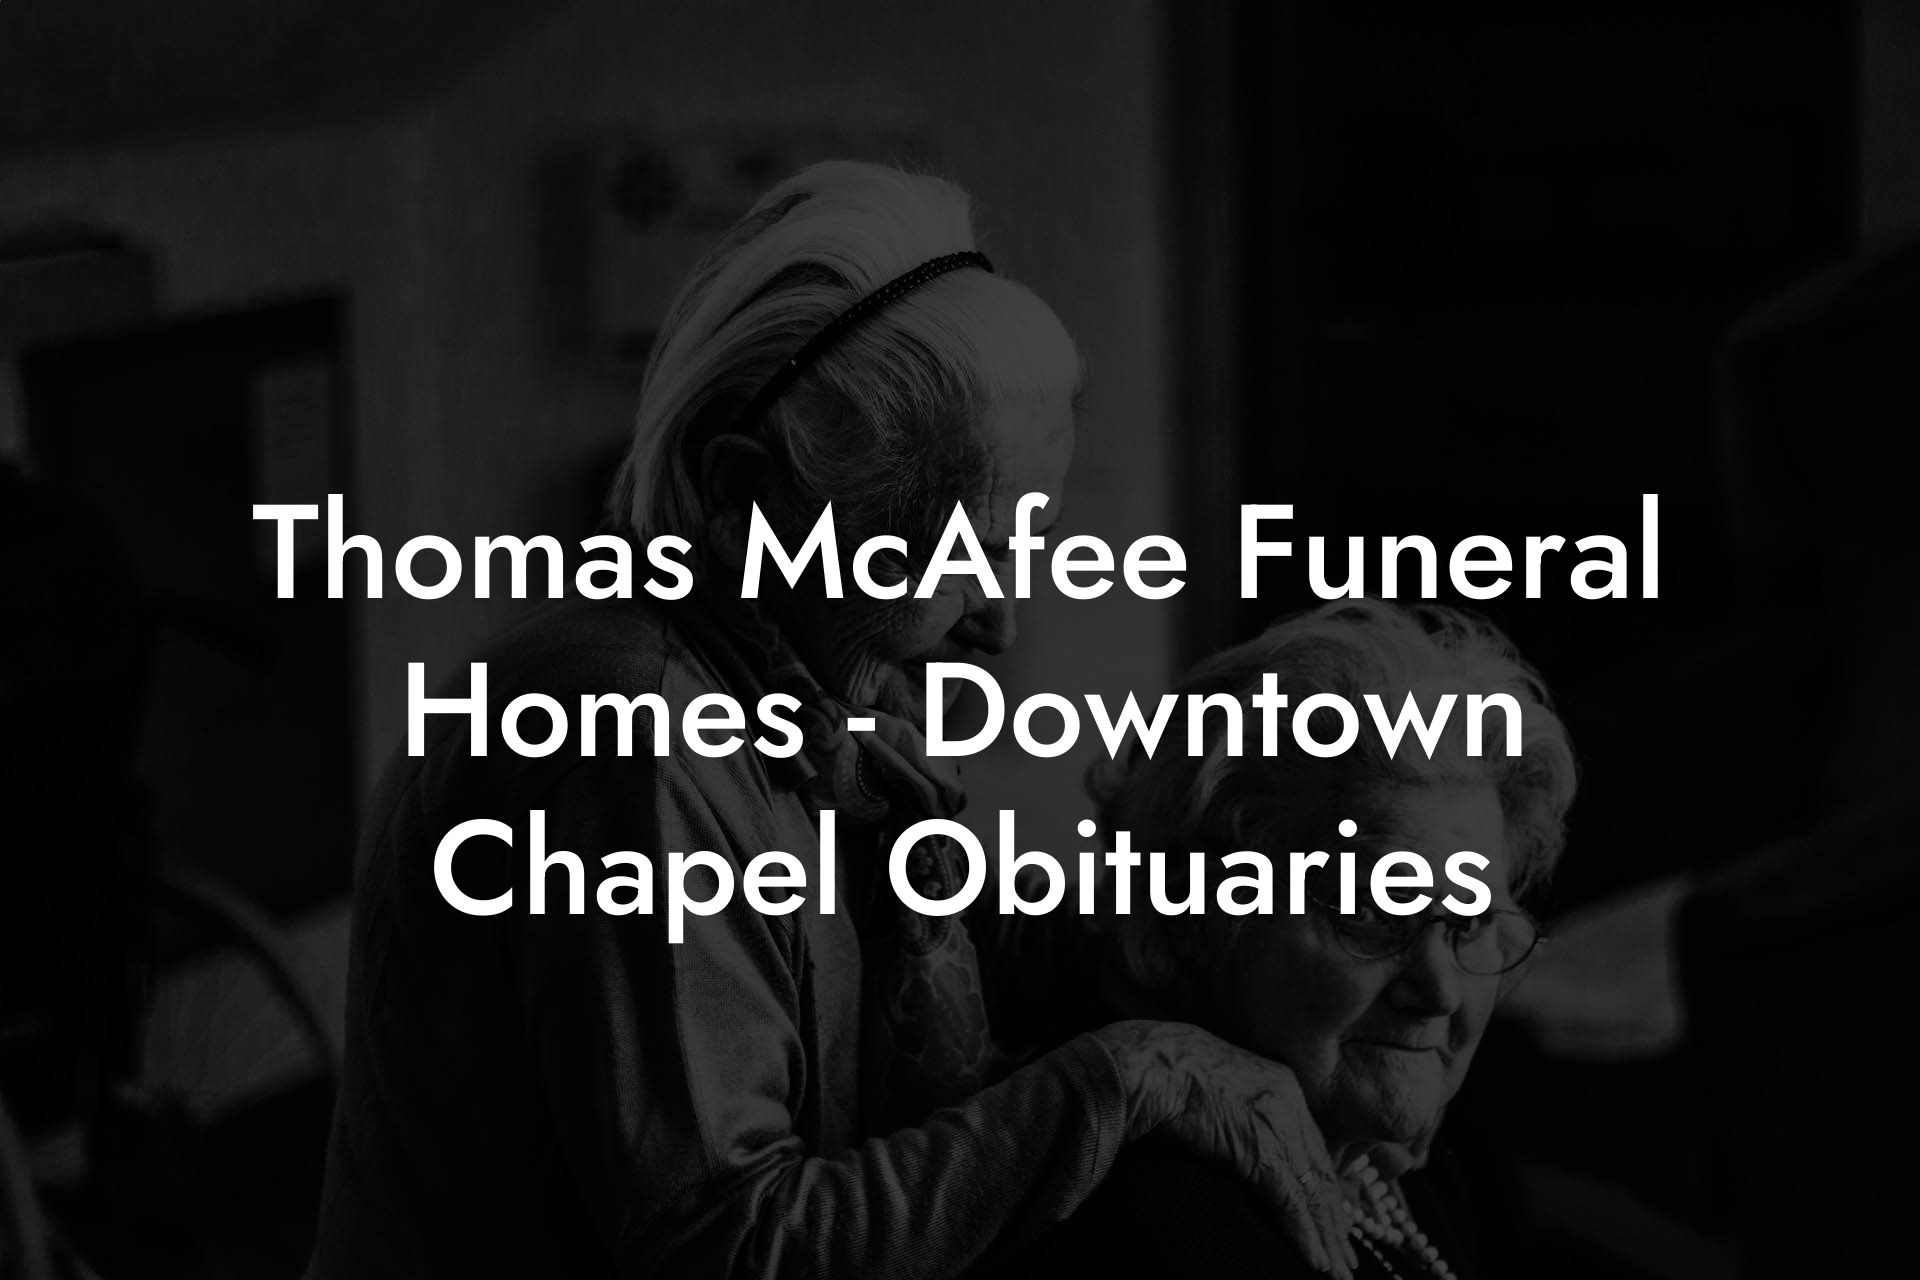 Thomas McAfee Funeral Homes - Downtown Chapel Obituaries